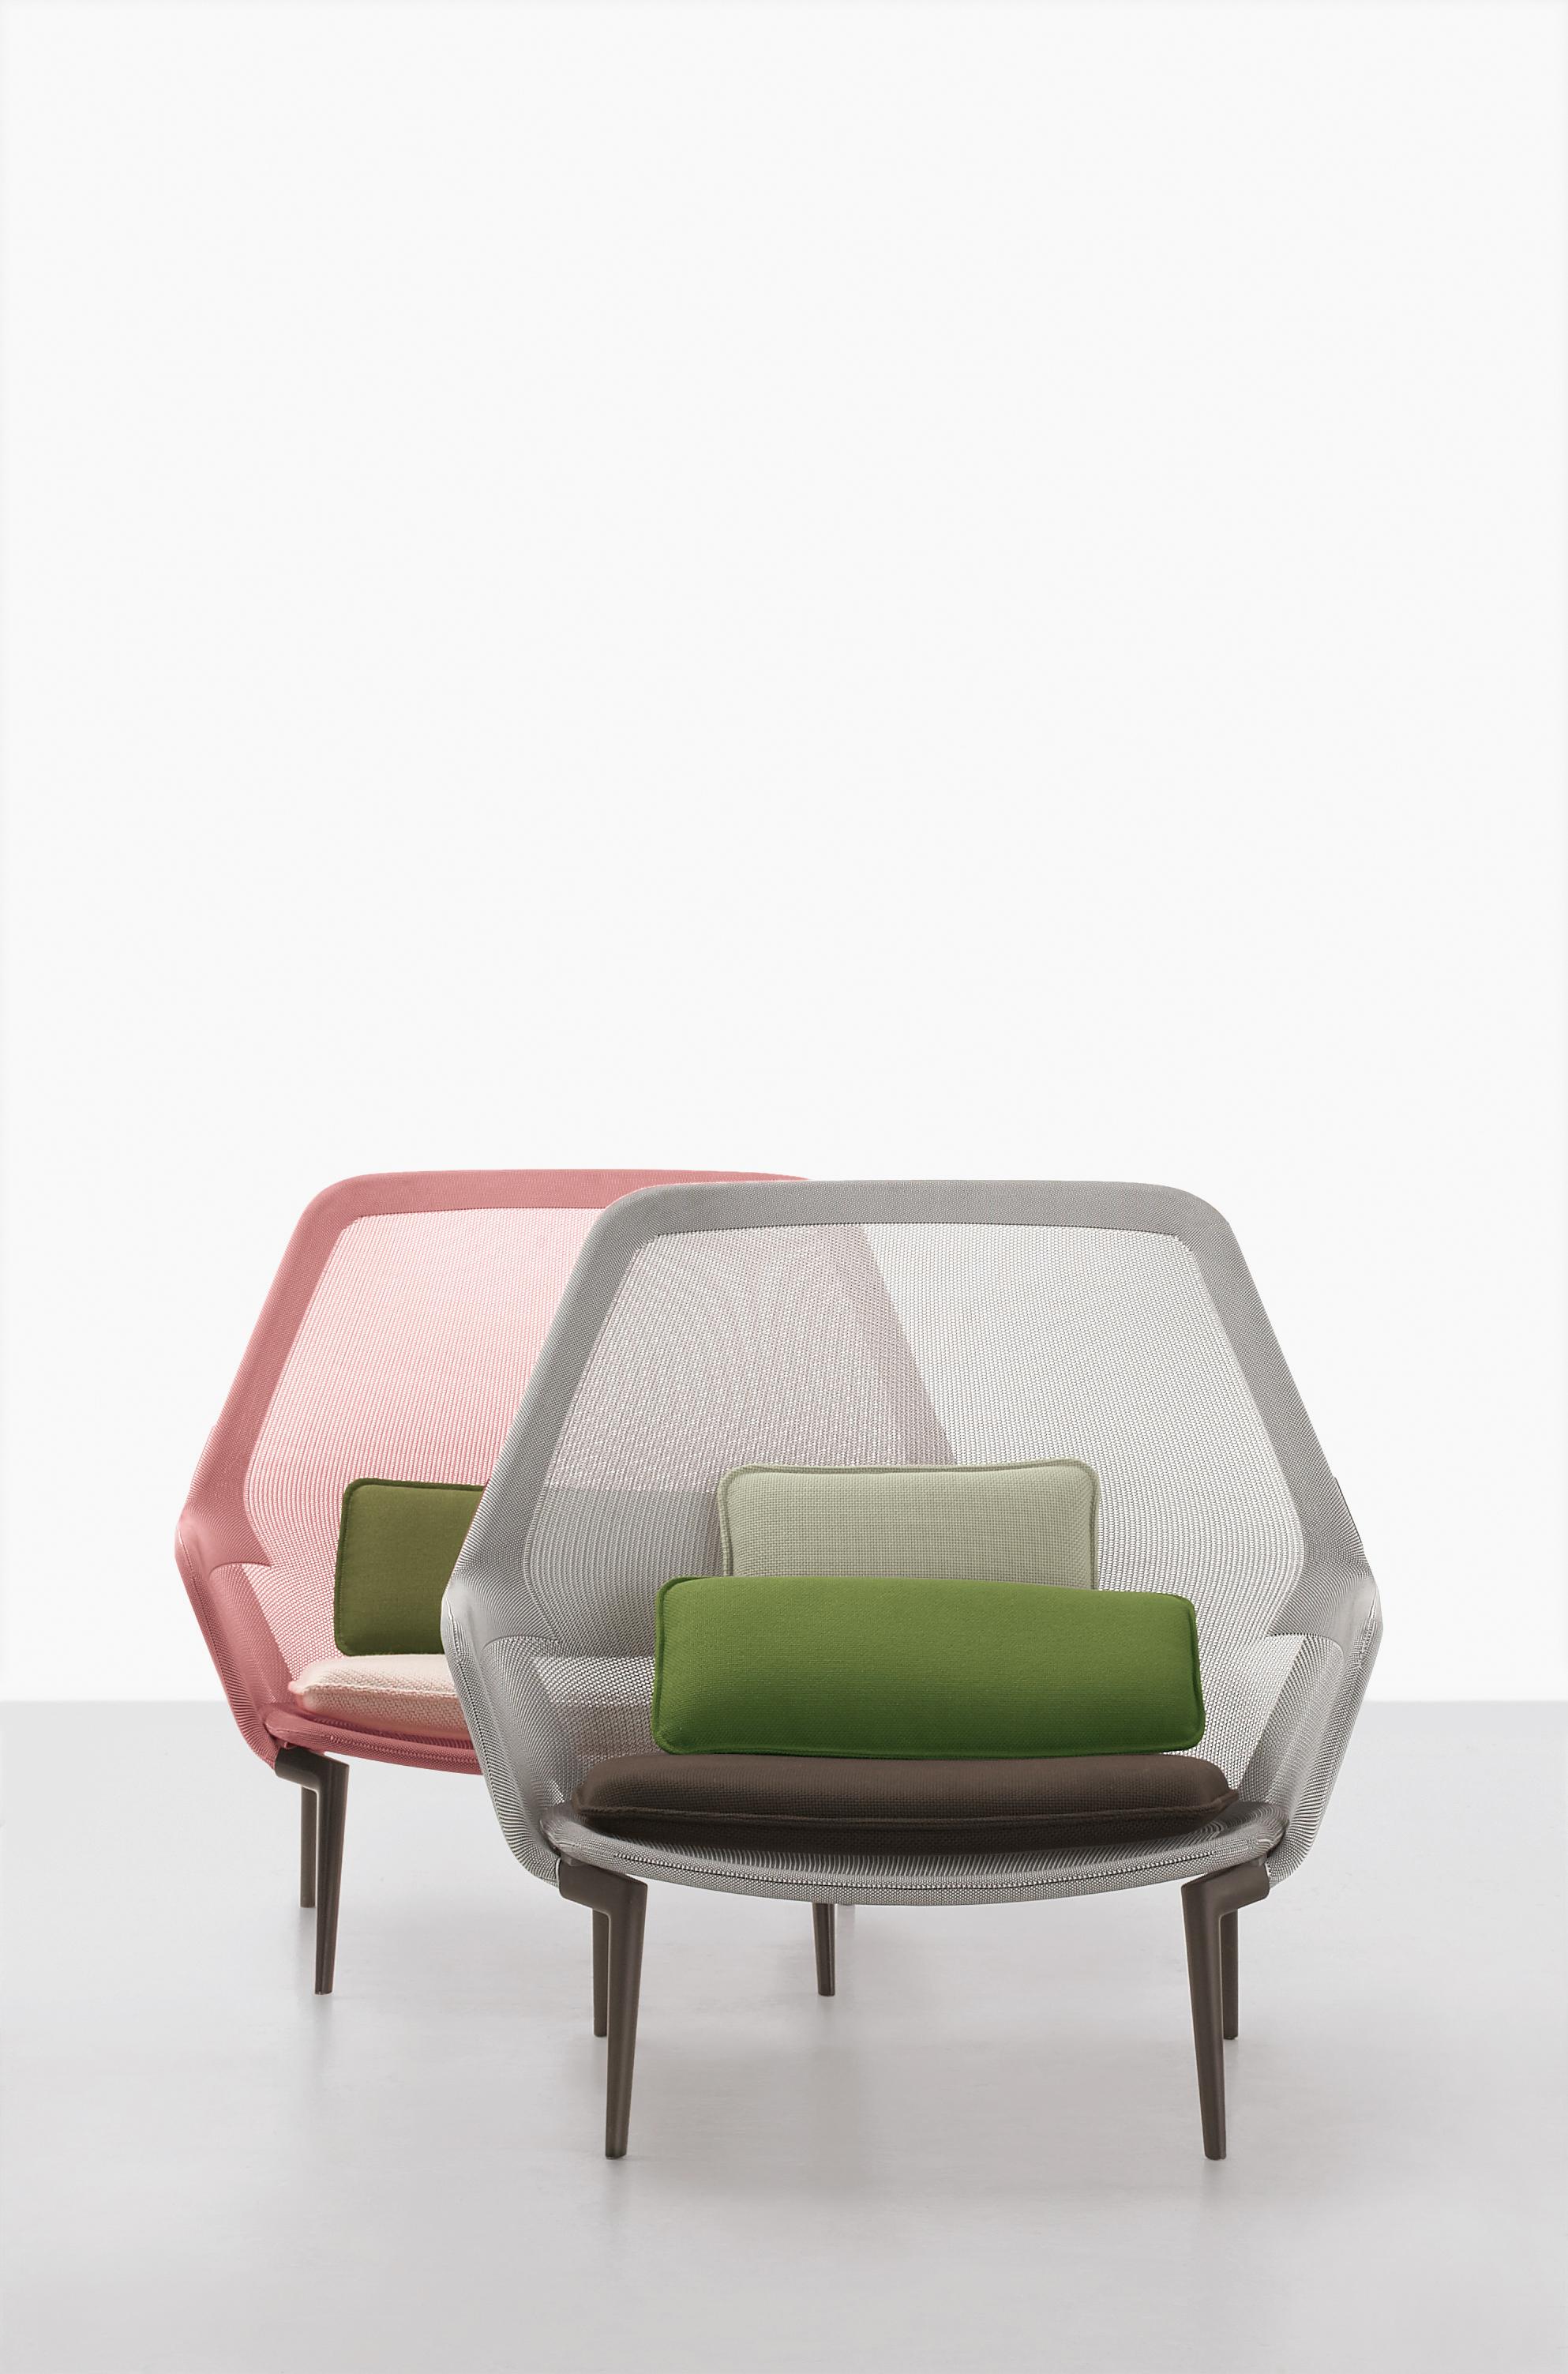 slow chair vitra